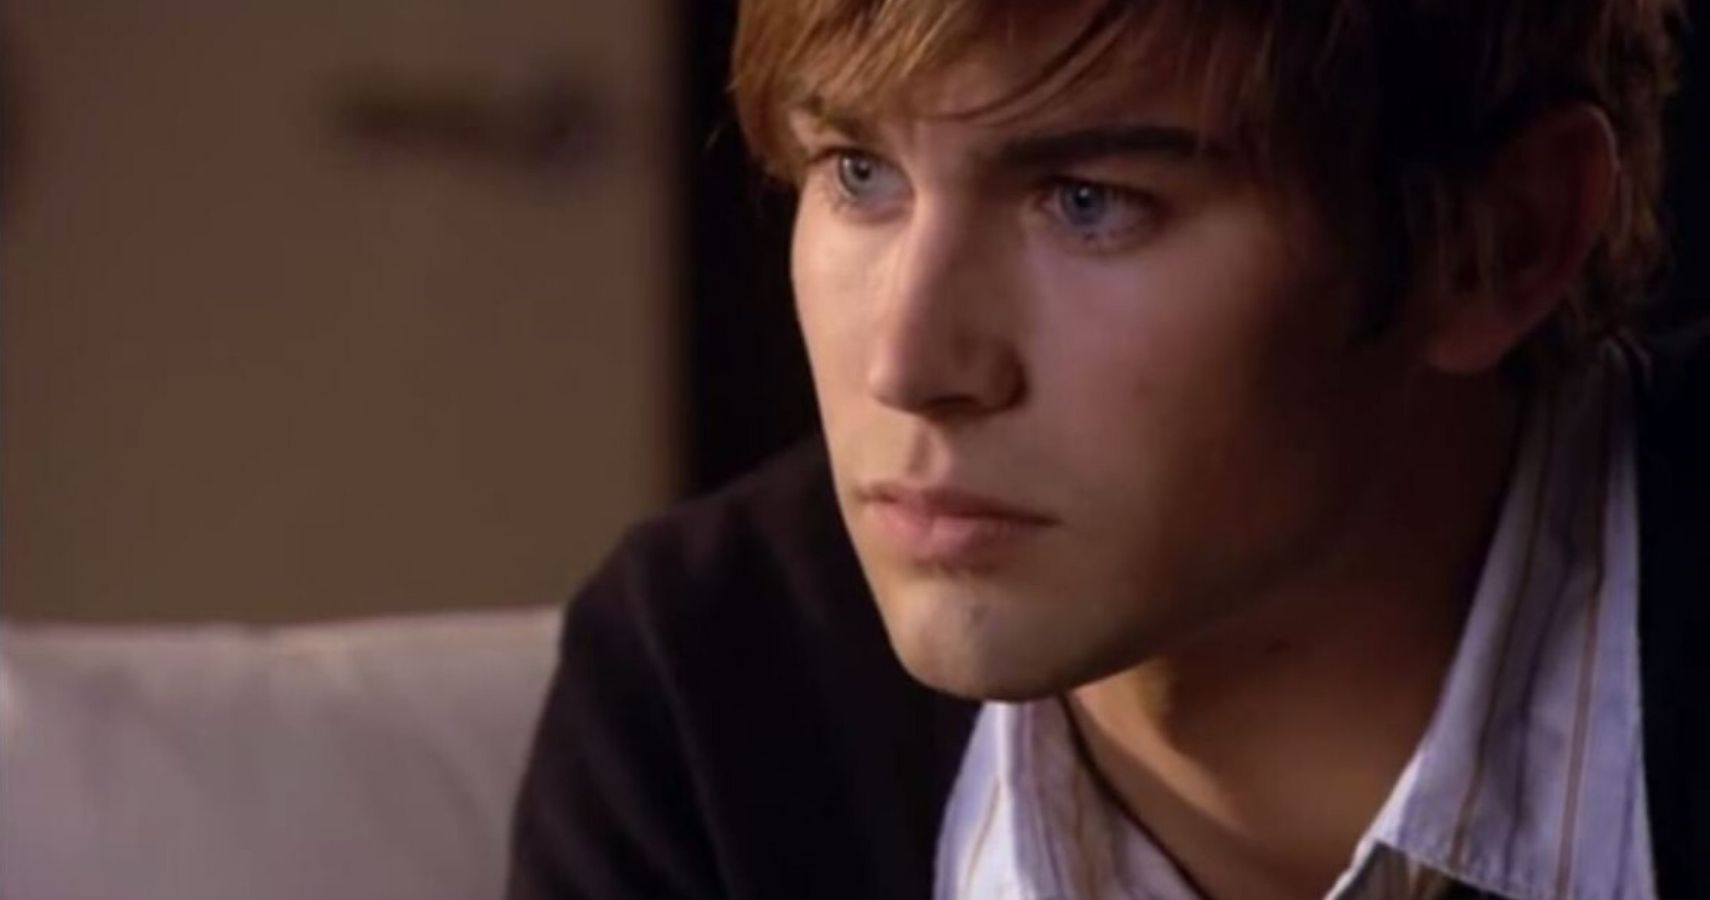 Can we talk about how Nate was the perfect character to be Gossip Girl ? :  r/GossipGirl